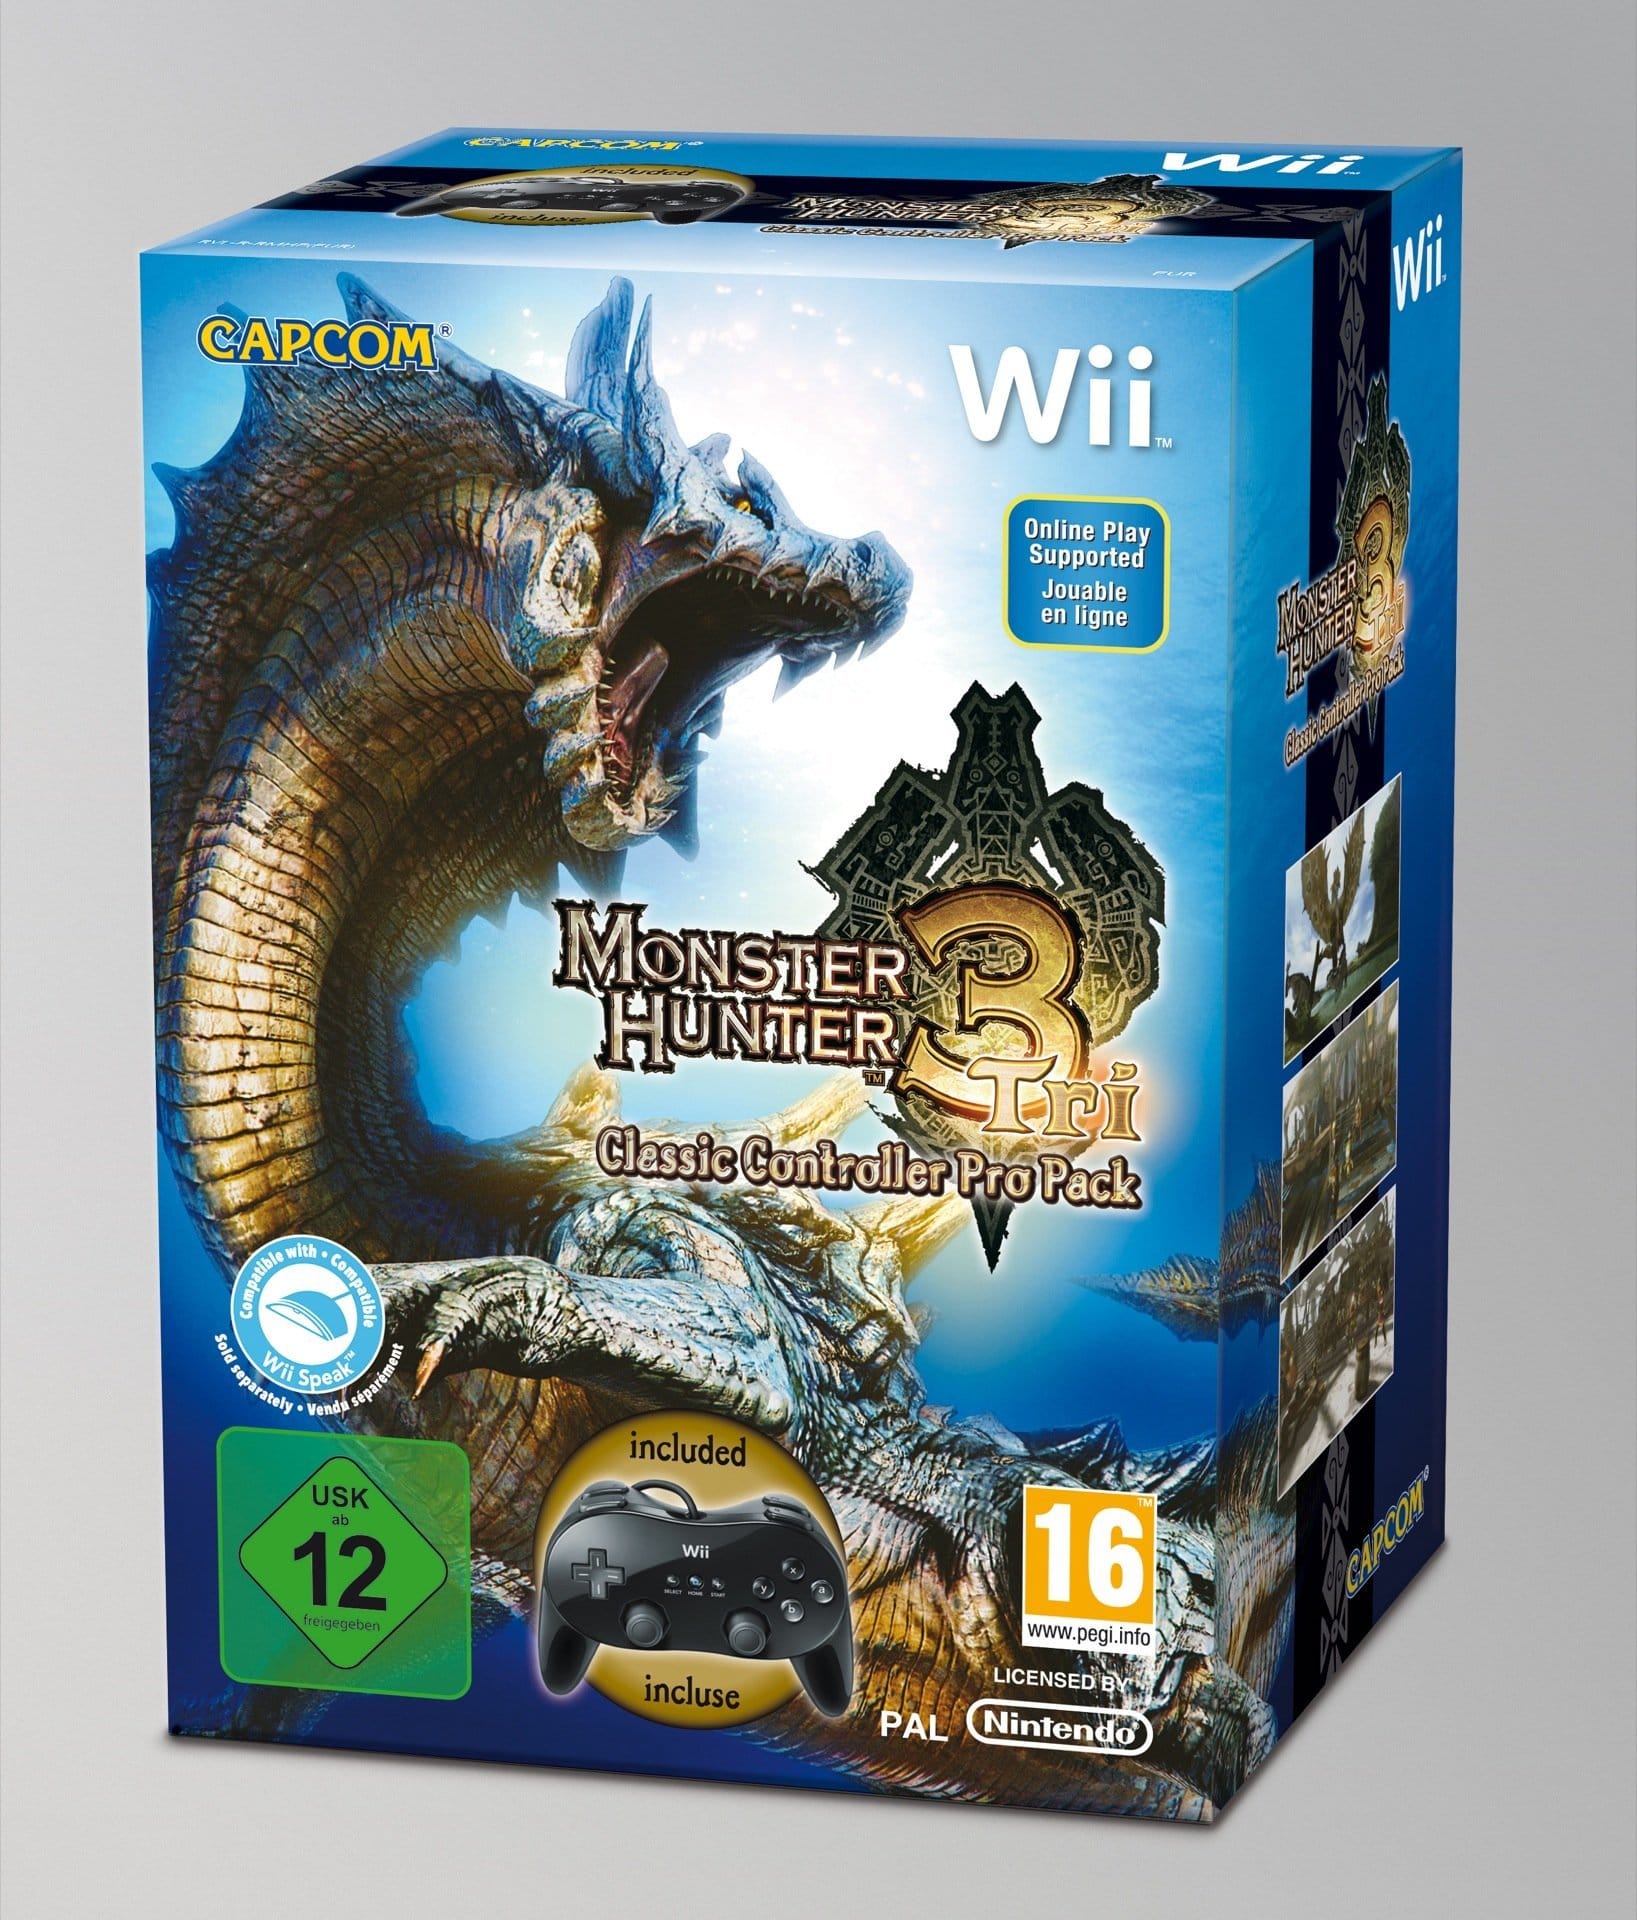 Monster Hunter Tri - Classic Controller Pro Pack